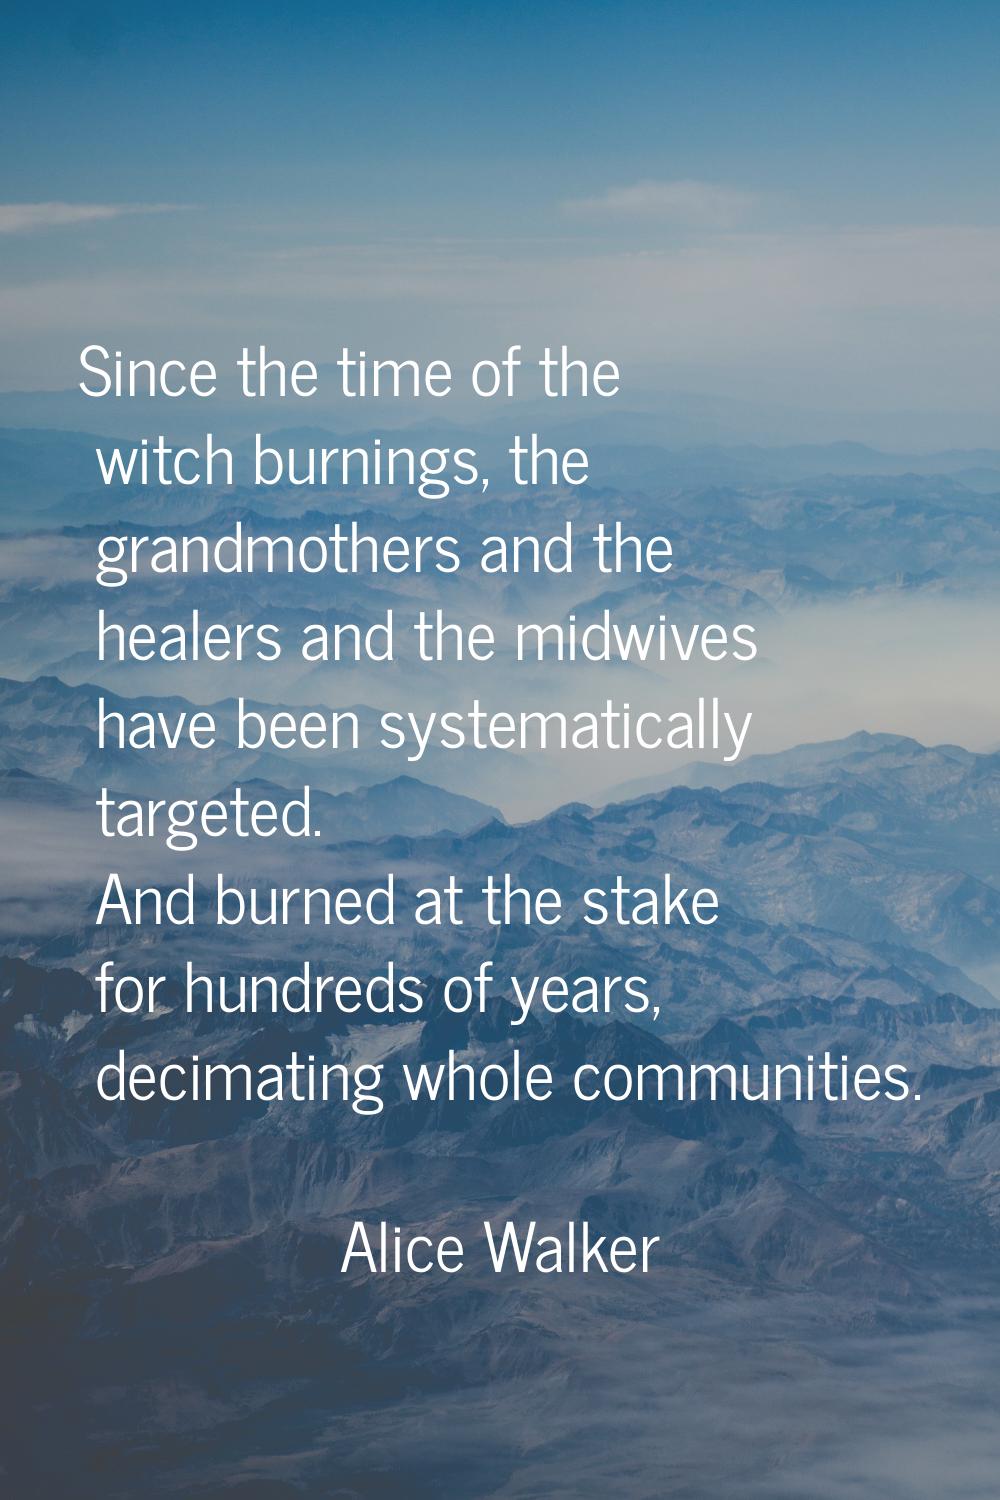 Since the time of the witch burnings, the grandmothers and the healers and the midwives have been s